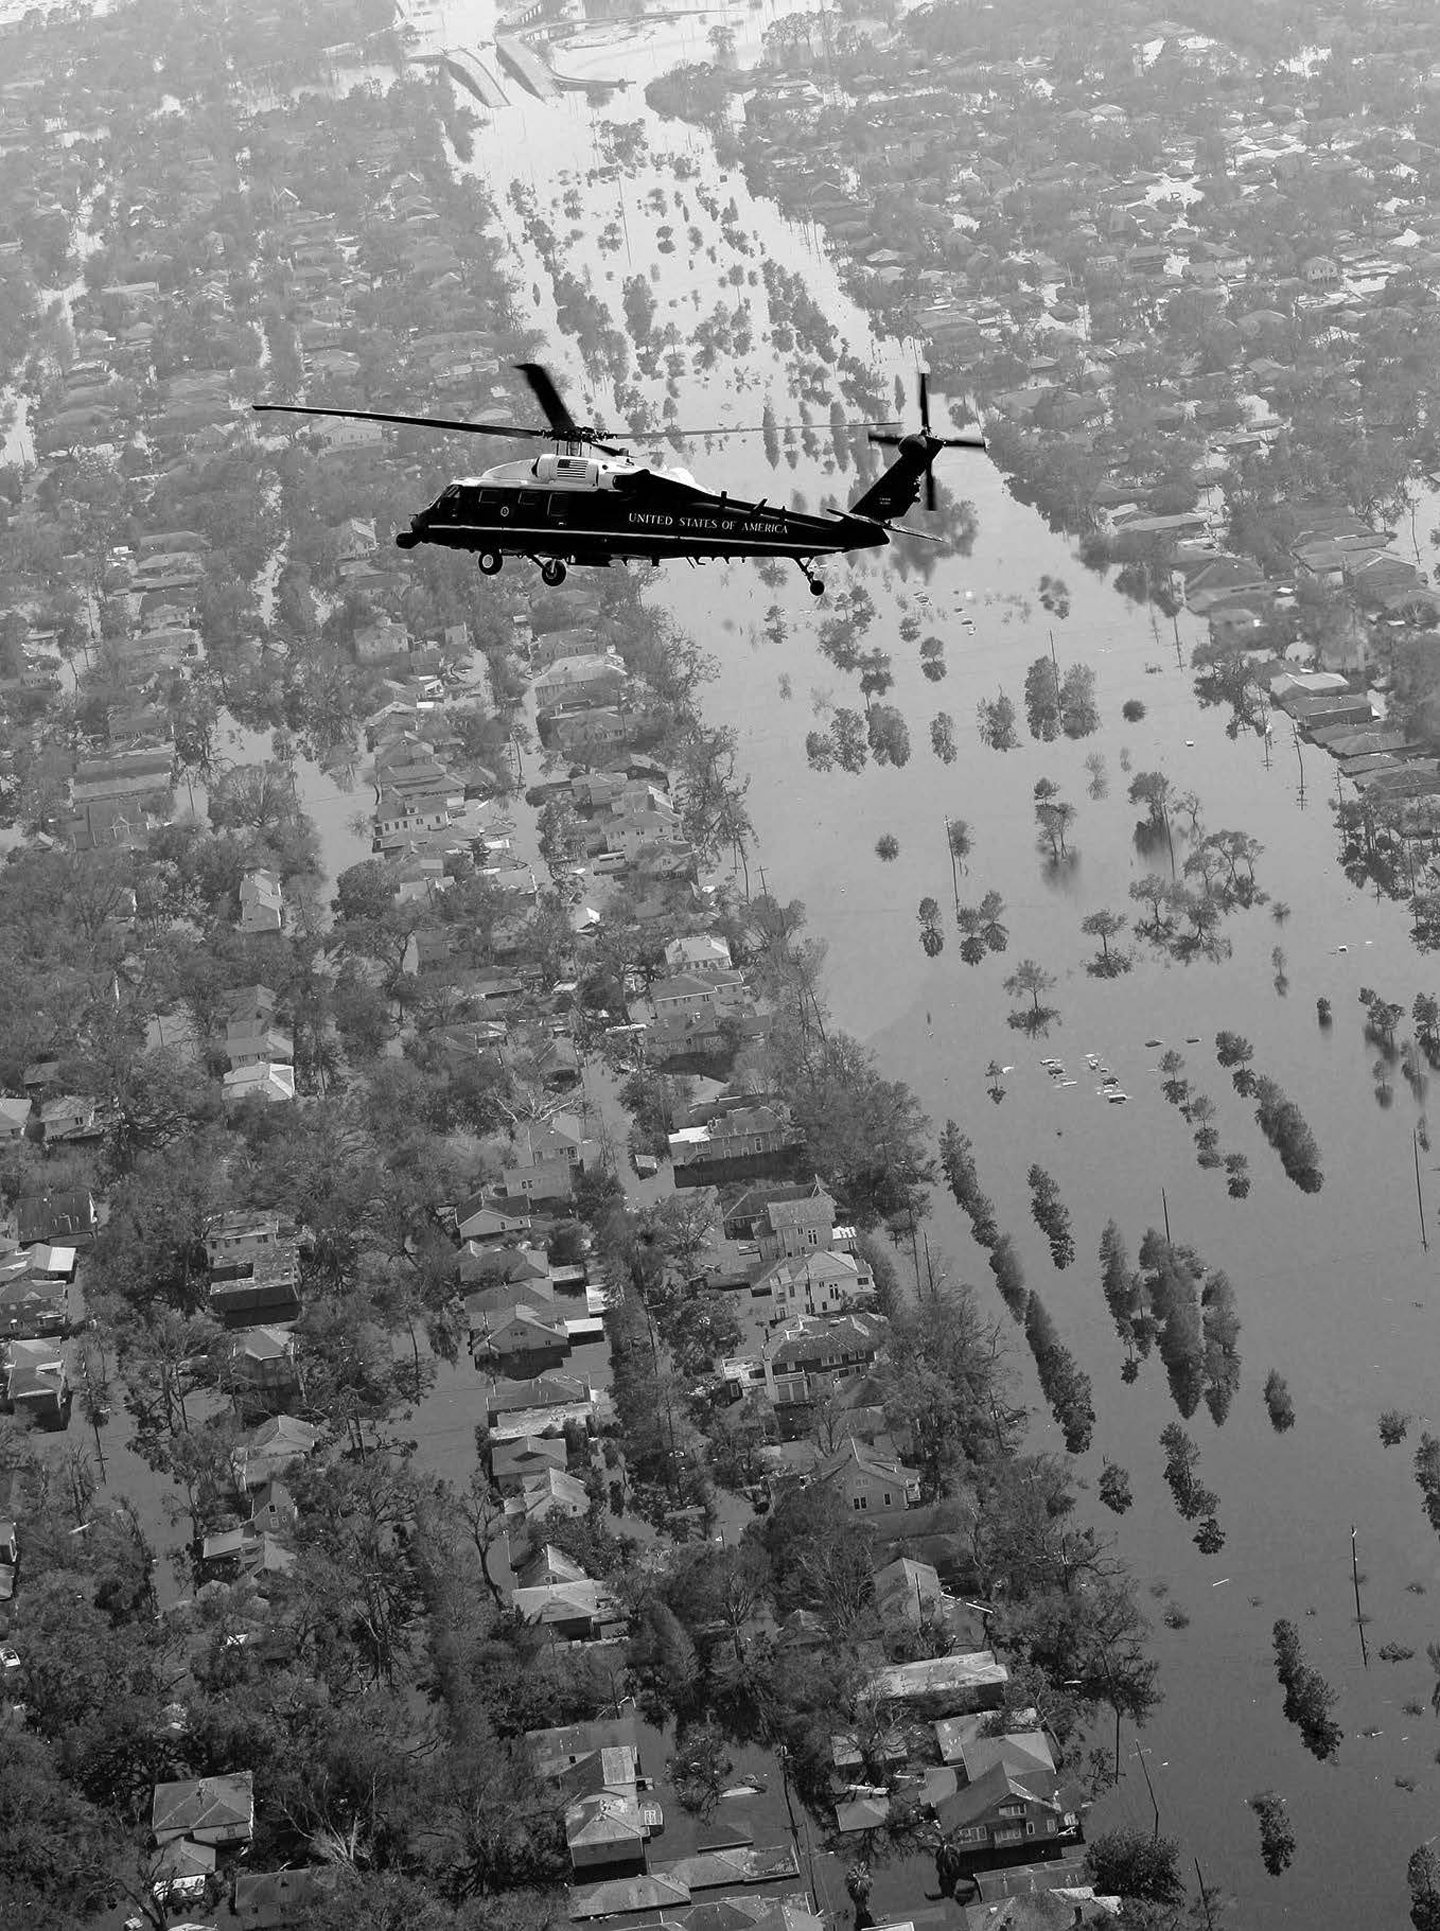 A helicopter flies over the devastation wrought by Hurricane Katrina.